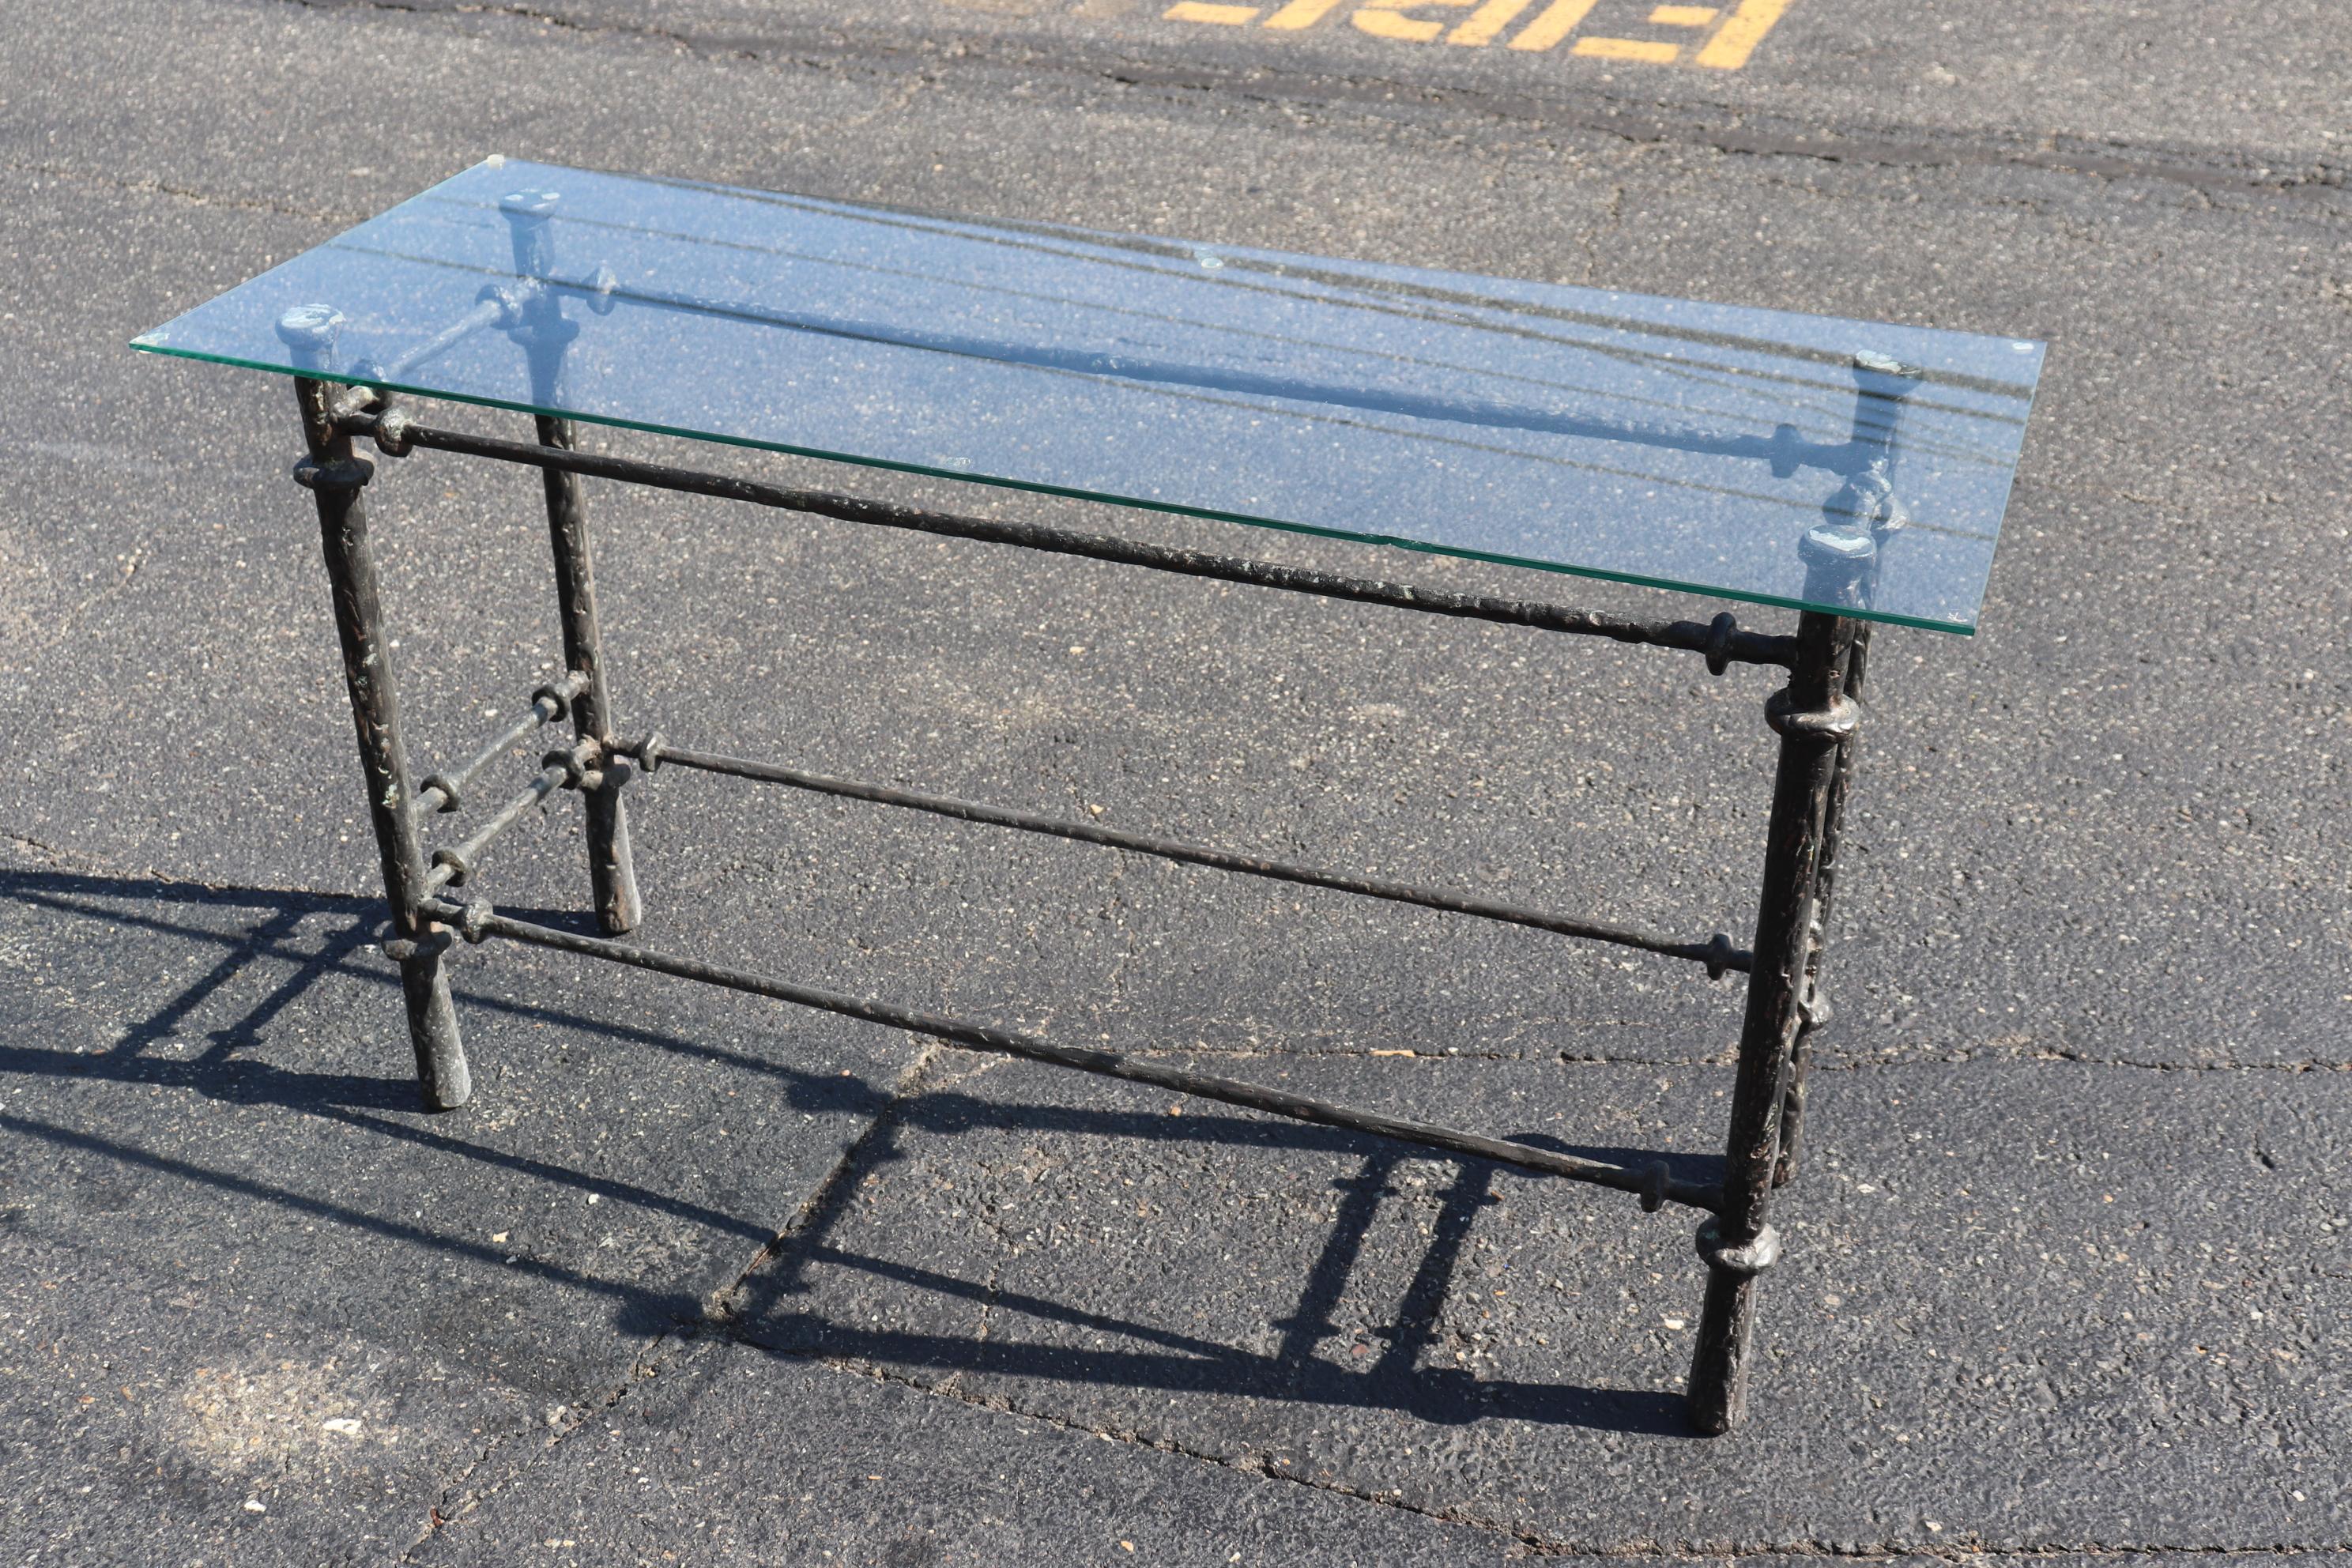 This is a unique Giacometti style wrought iron table with a plate glass top. The table base measures 42 x 13 deep x 26.75 tall and the table itself with the glass measures 48 wide x 17 deep x 27 tall. The table dates to the 1970s era and would look